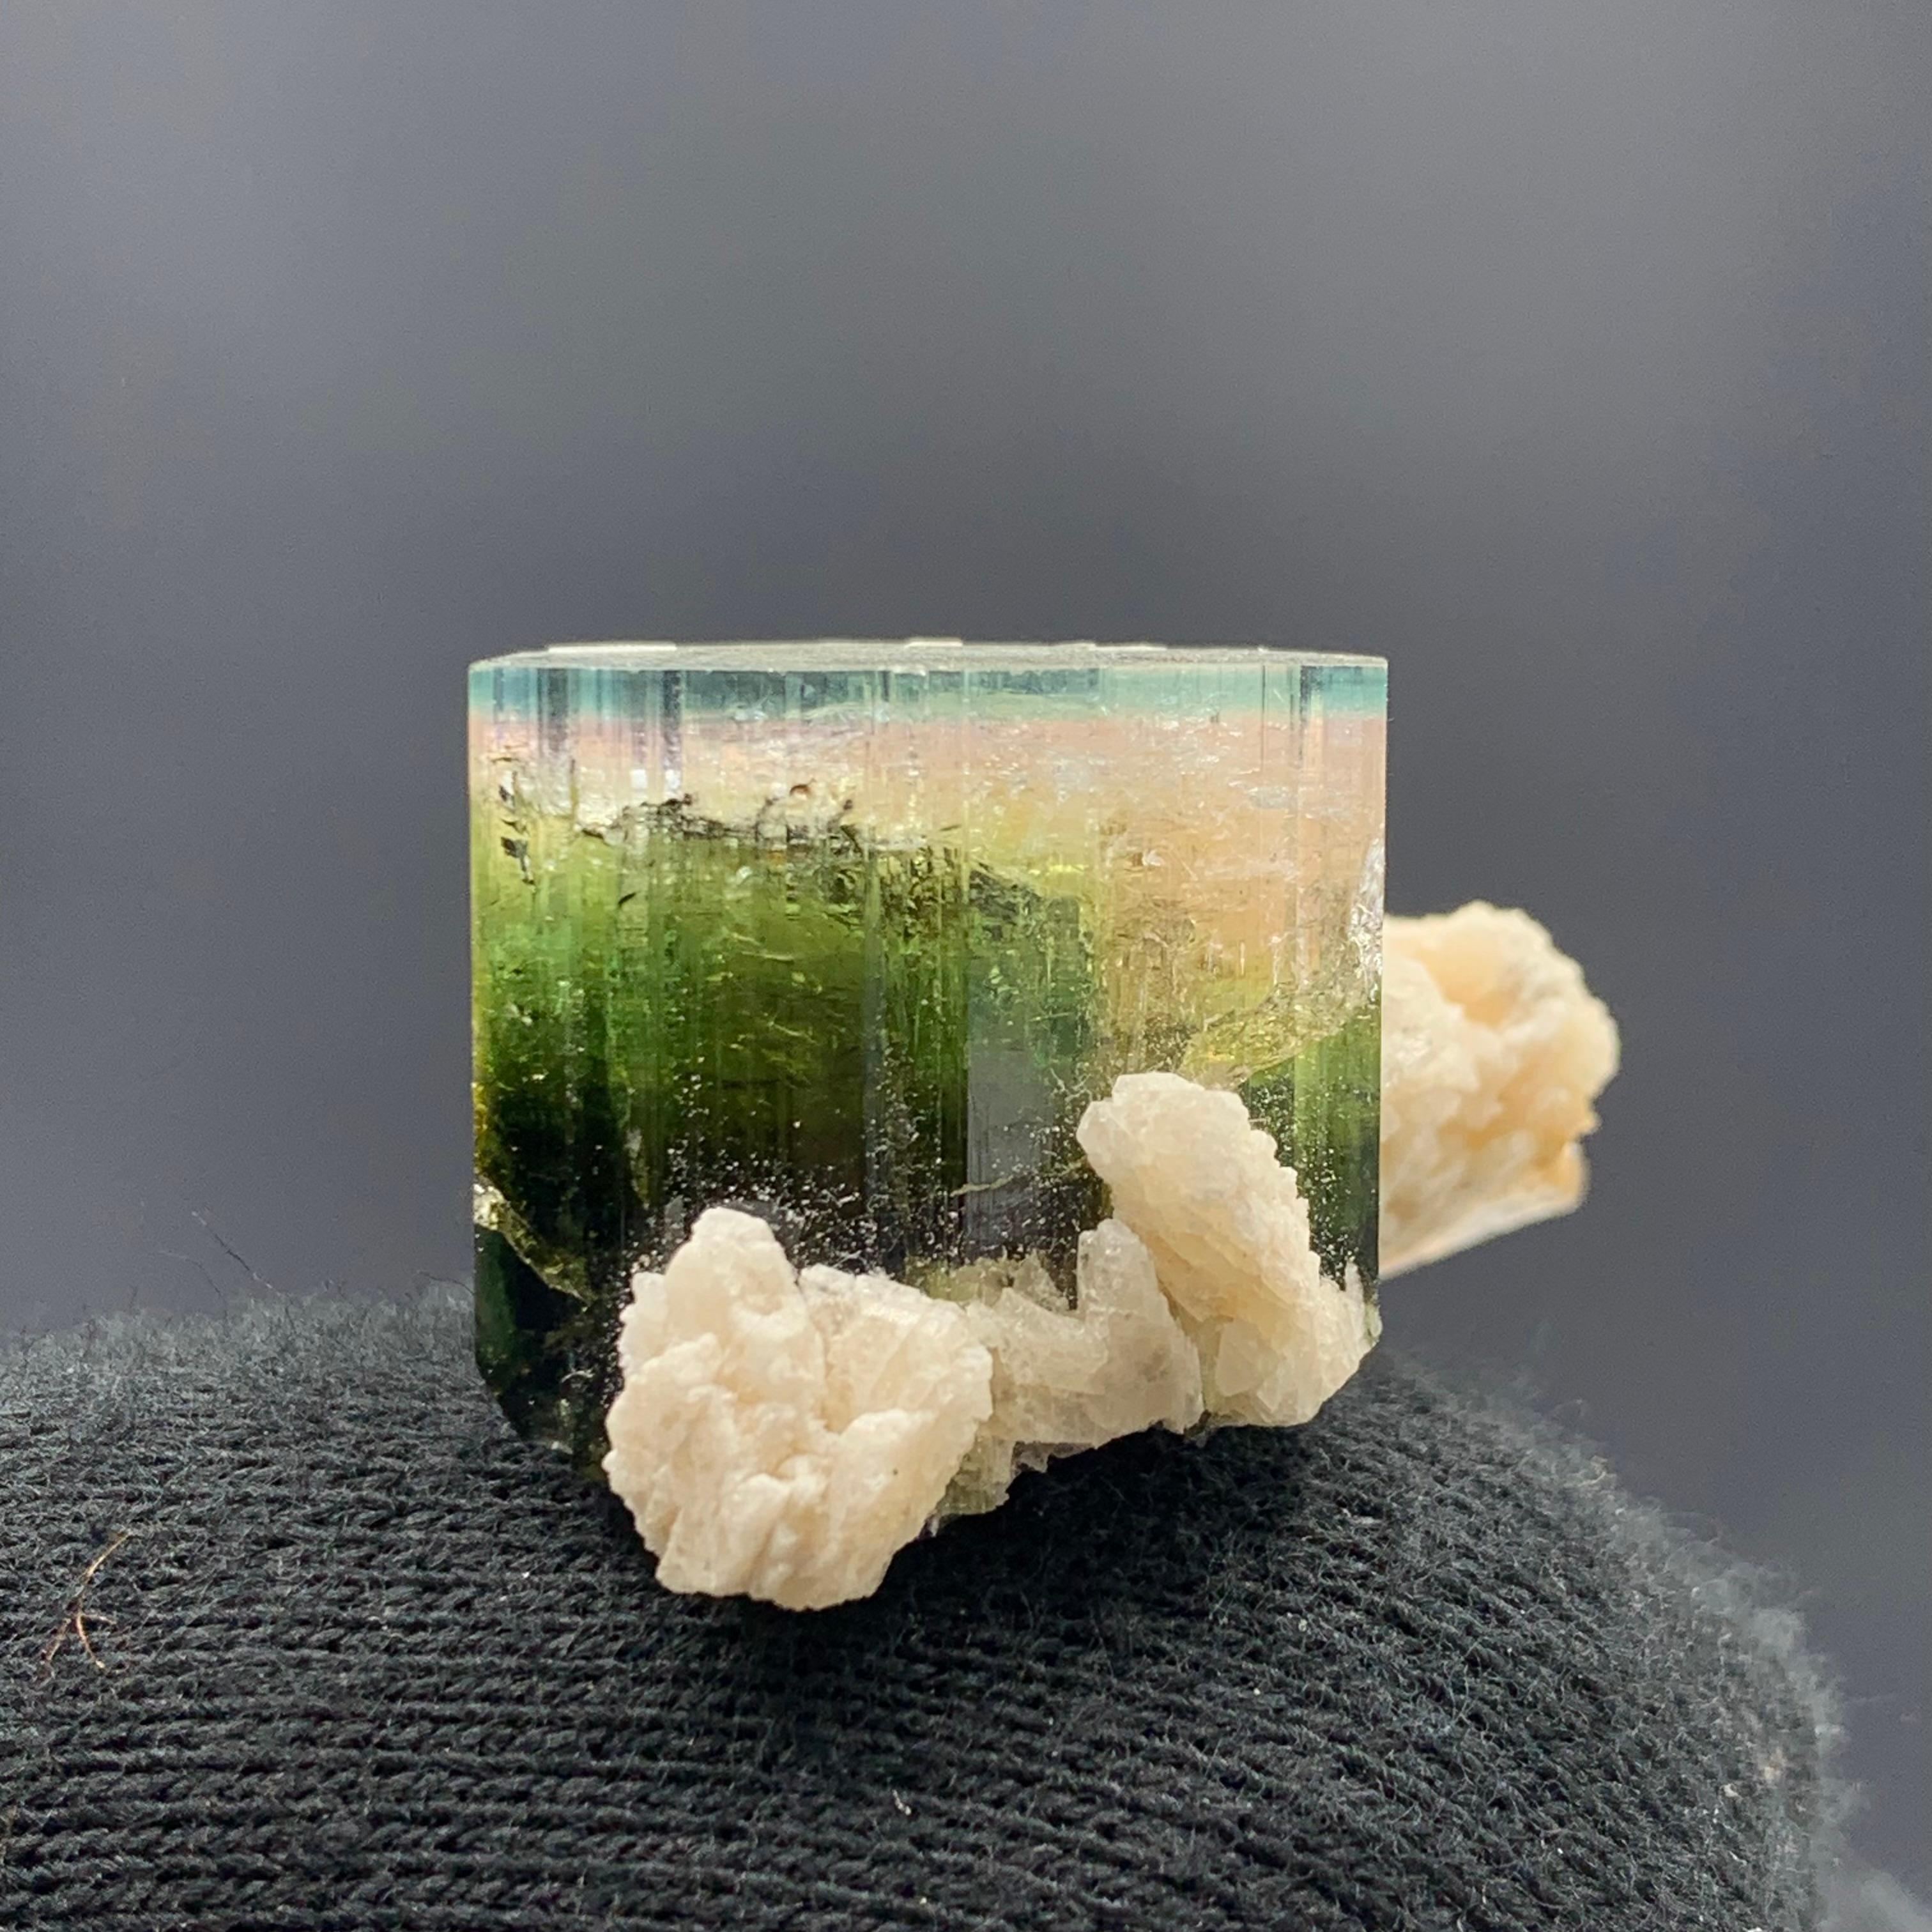 58.50 Carat Blue Cap Tri Color Tourmaline With Albite From Afghanistan 

Weight: 58.50 Carat 
Dimension:  1.8 x 2.9 x 2.2 
Origin: Paprook, Afghanistan 

Tourmaline is a crystalline silicate mineral group in which boron is compounded with elements